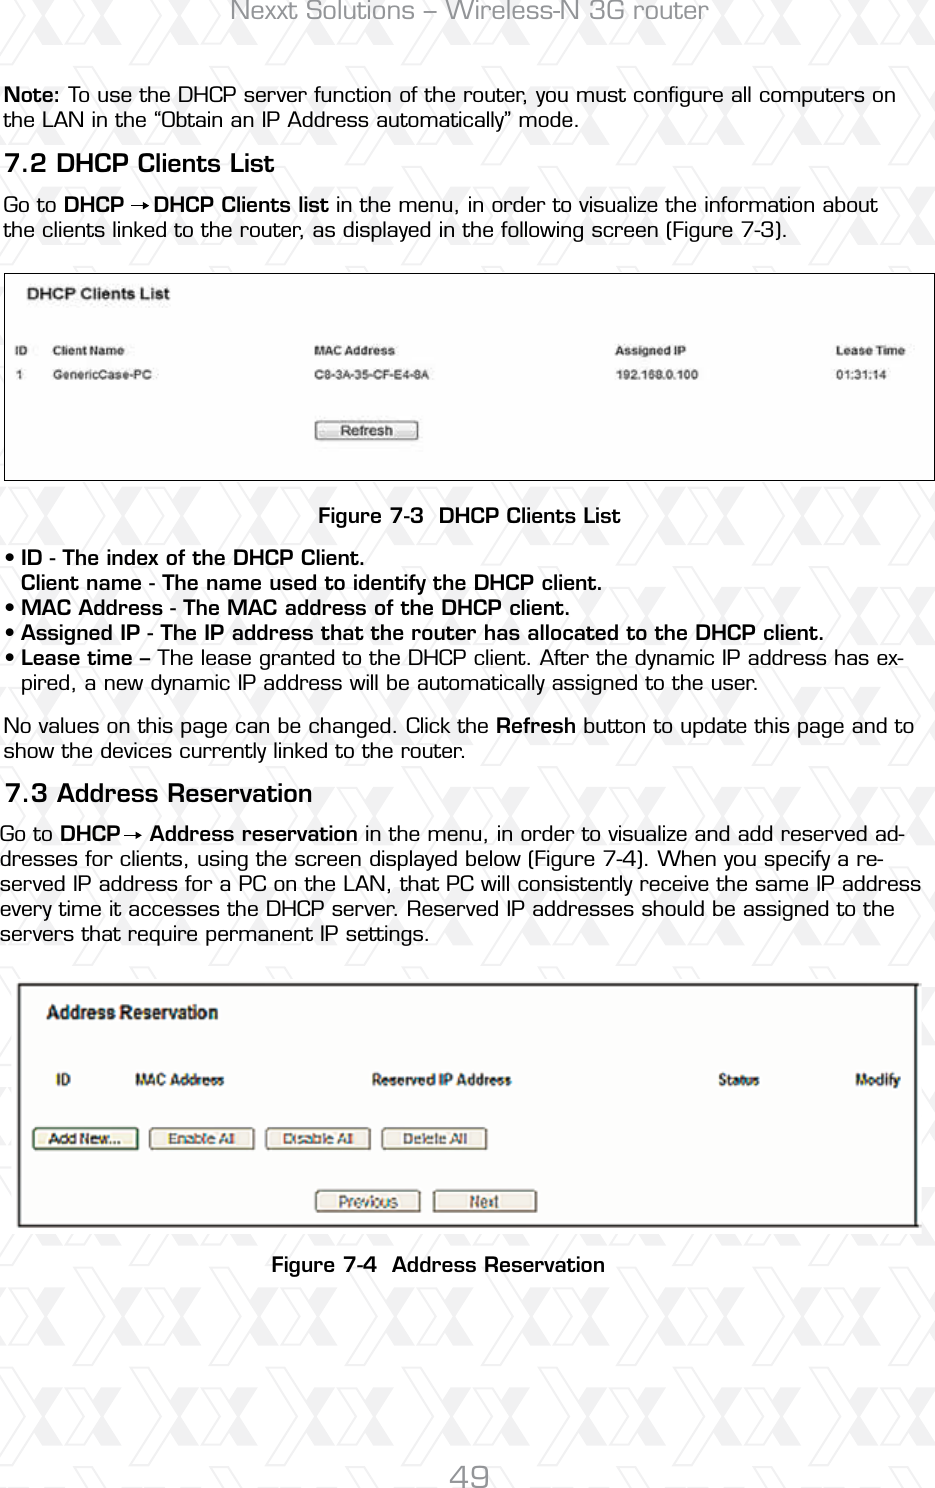 Nexxt Solutions – Wireless-N 3G router49Figure 7-3  DHCP Clients ListFigure 7-4  Address Reservation7.3 Address Reservation7.2 DHCP Clients ListID - The index of the DHCP Client. Client name - The name used to identify the DHCP client. MAC Address - The MAC address of the DHCP client. Assigned IP - The IP address that the router has allocated to the DHCP client.Lease time – The lease granted to the DHCP client. After the dynamic IP address has ex-pired, a new dynamic IP address will be automatically assigned to the user.No values on this page can be changed. Click the Refresh button to update this page and to show the devices currently linked to the router.Go to DHCP    Address reservation in the menu, in order to visualize and add reserved ad-dresses for clients, using the screen displayed below (Figure 7-4). When you specify a re-served IP address for a PC on the LAN, that PC will consistently receive the same IP address every time it accesses the DHCP server. Reserved IP addresses should be assigned to the servers that require permanent IP settings. Note: To use the DHCP server function of the router, you must conﬁgure all computers on the LAN in the “Obtain an IP Address automatically” mode.Go to DHCP    DHCP Clients list in the menu, in order to visualize the information about the clients linked to the router, as displayed in the following screen (Figure 7-3).••••